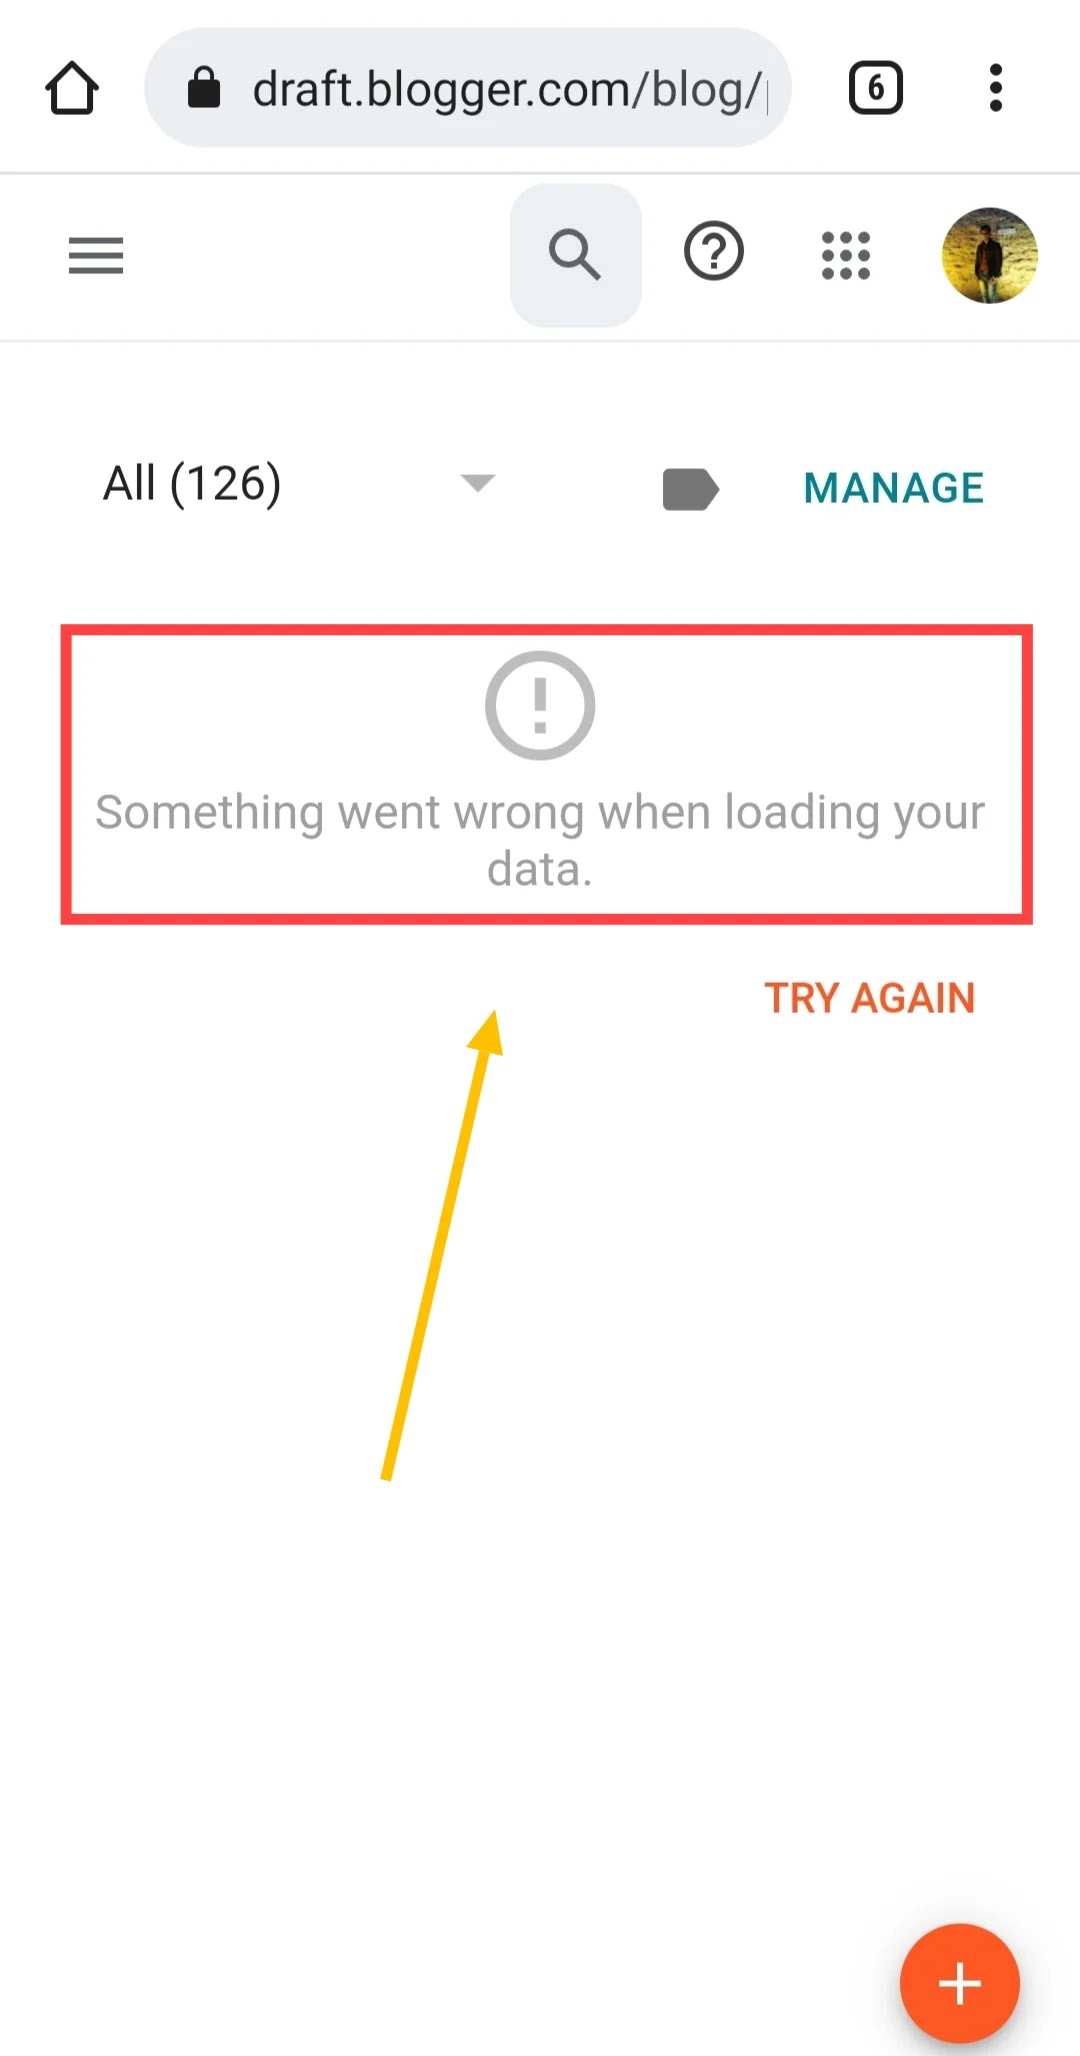 Something went wrong when loading your data